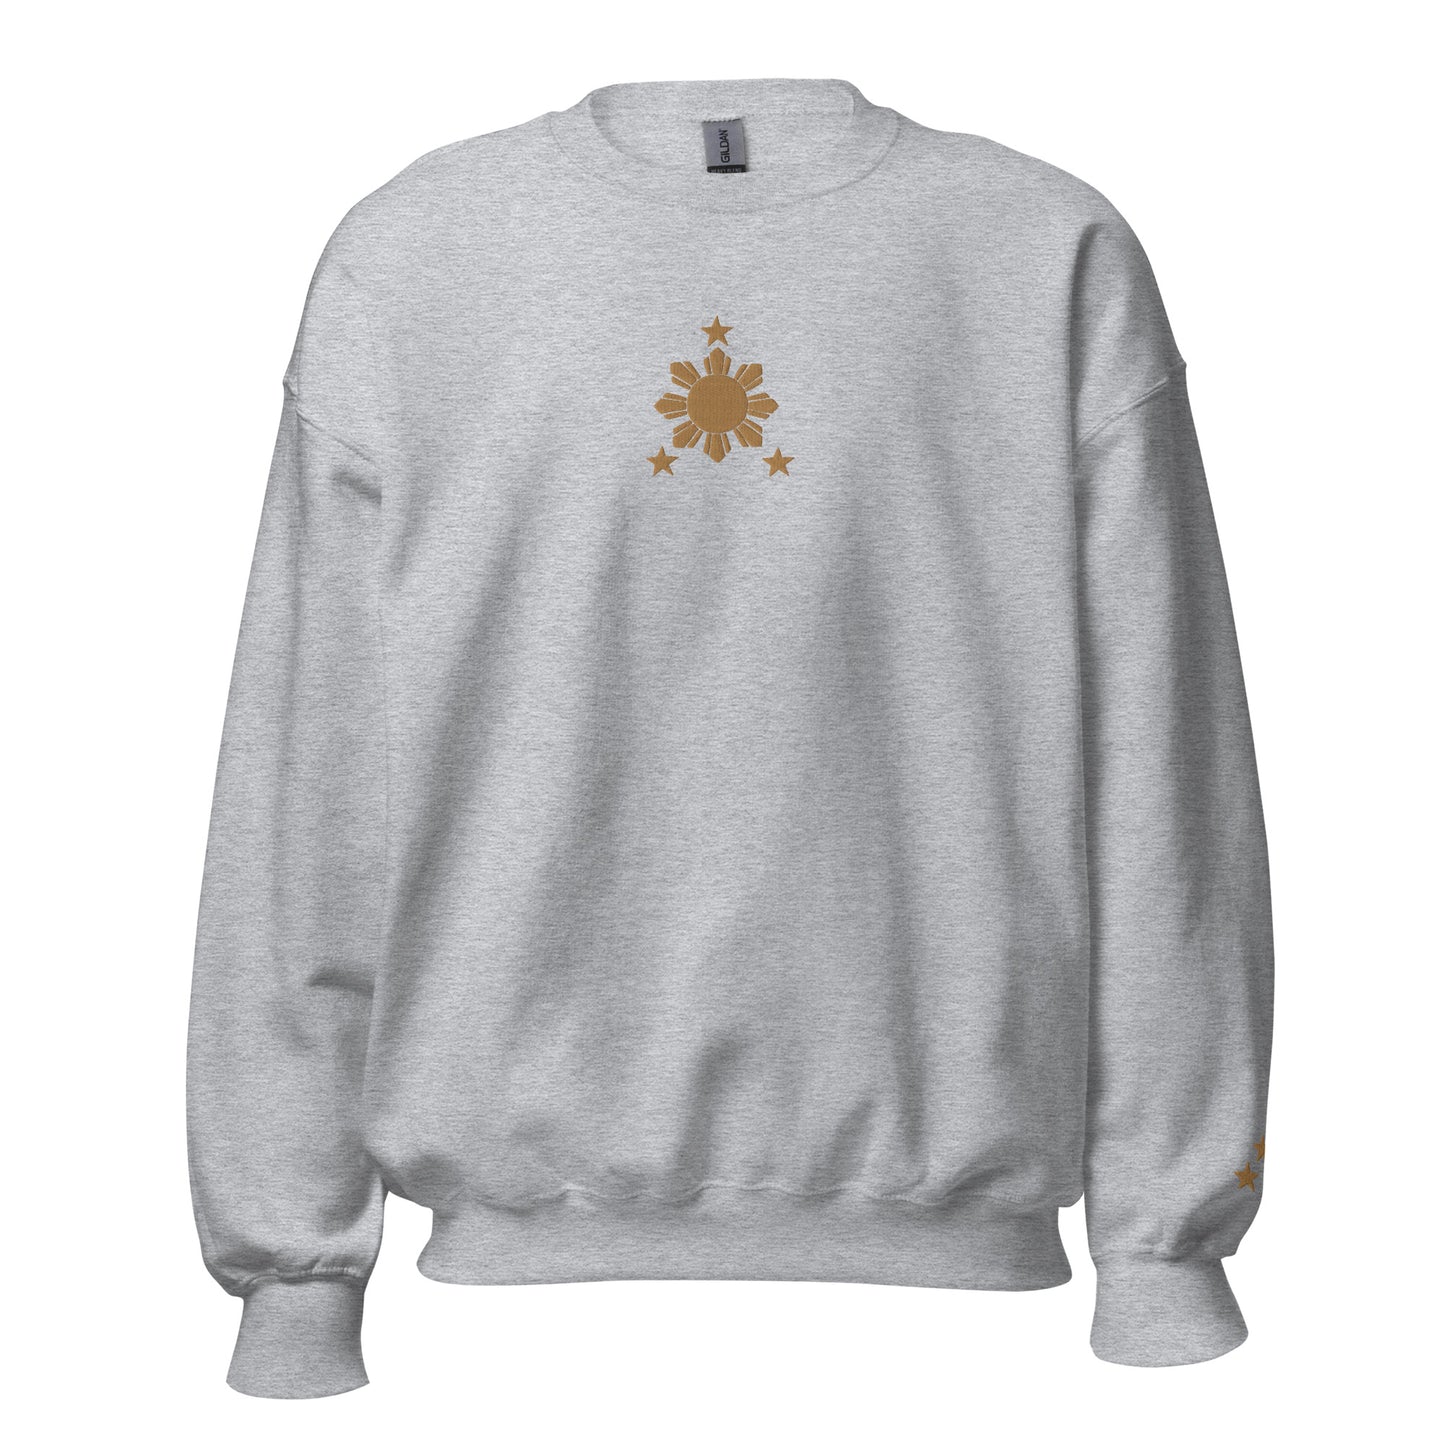 Filipino Sweatshirt Crew Neck Stars and Sun Embroidered Merch in color variant Gray